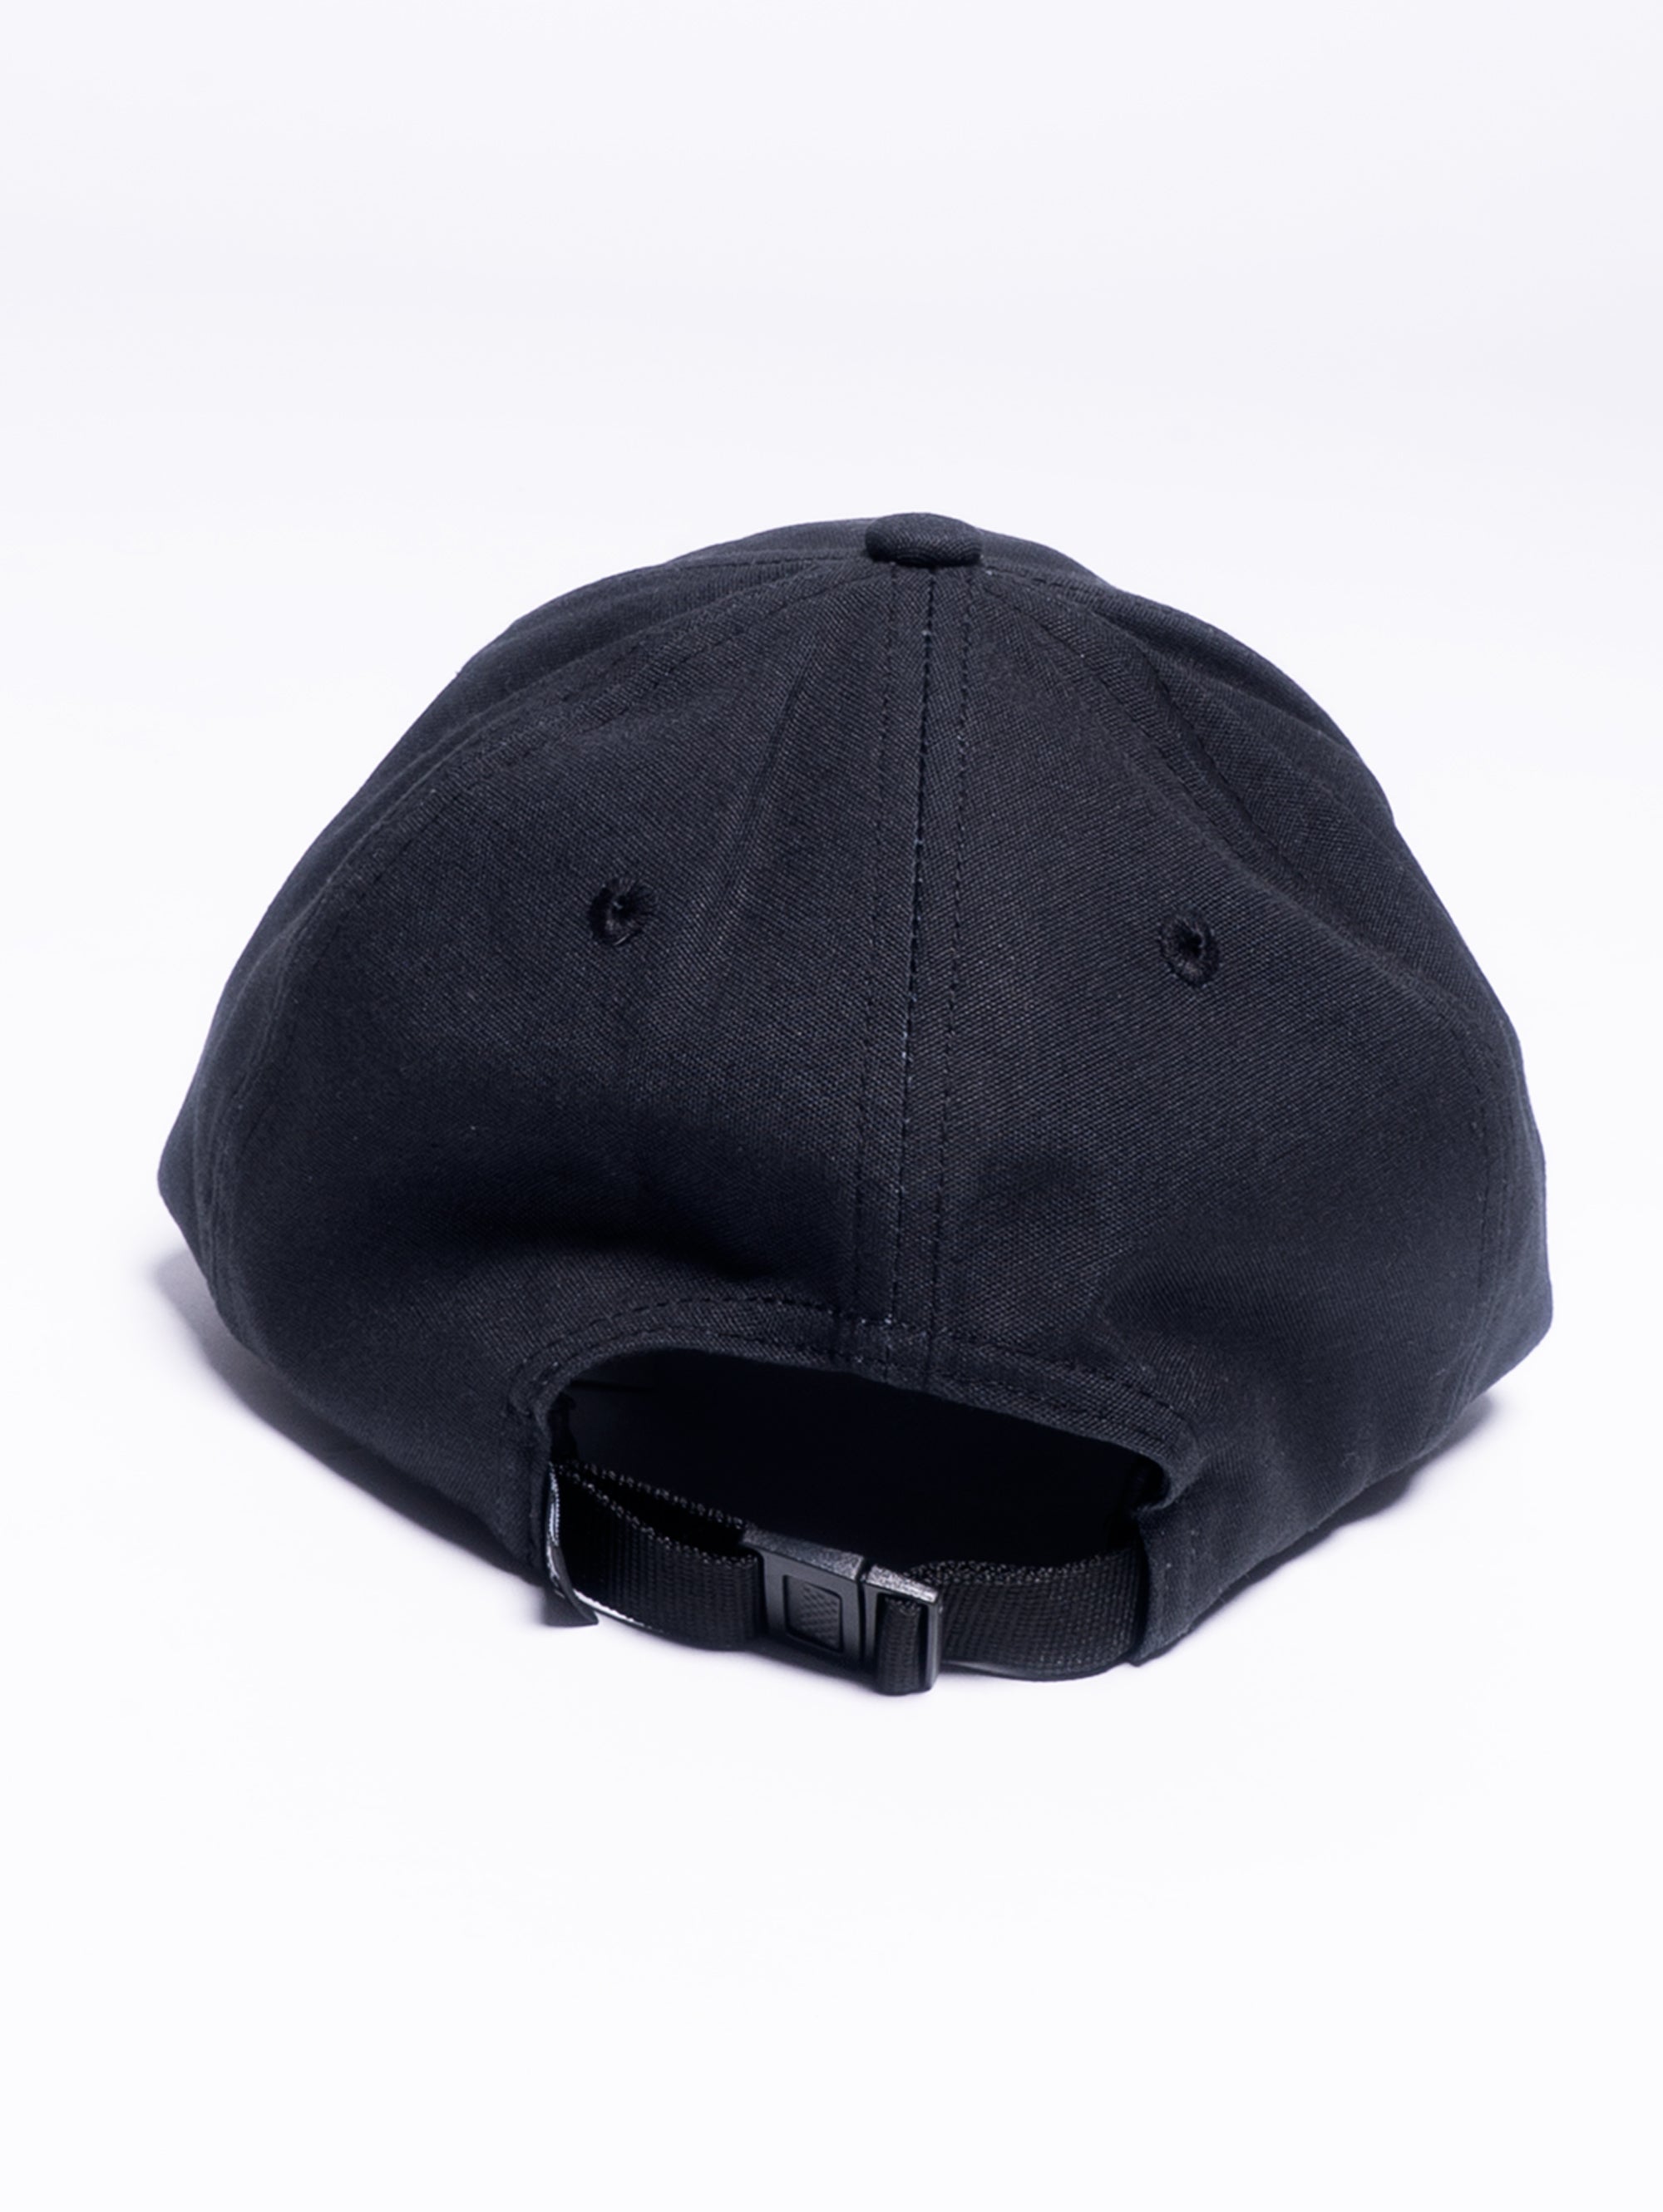 Hat in Black Cotton Reps